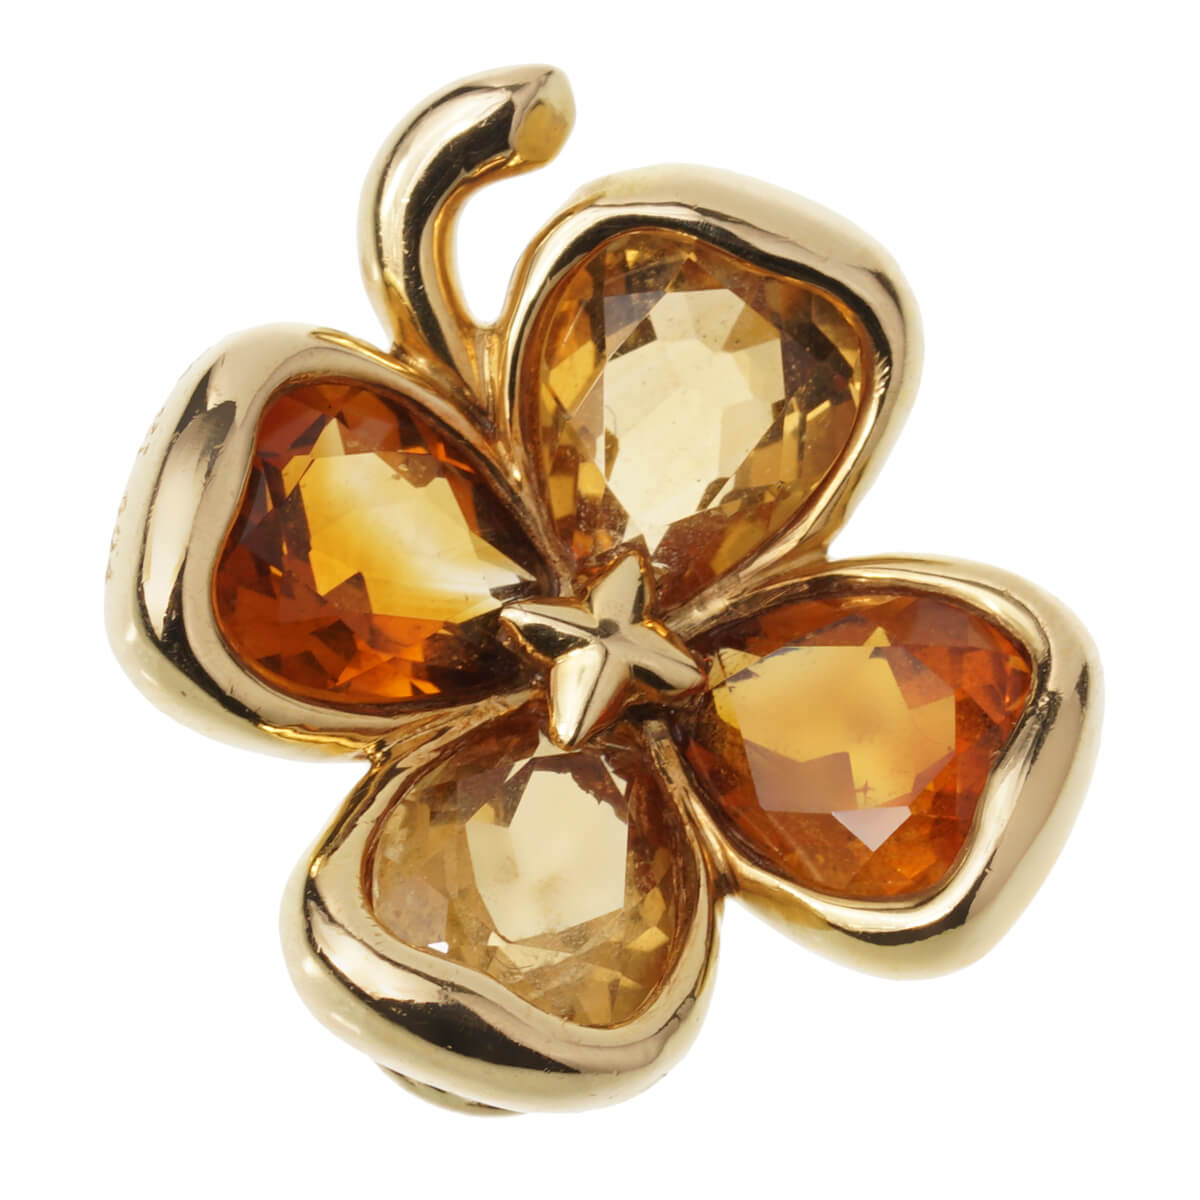 Exquisite and Lucky! Chanel 18K Yellow Gold Diamond Four Leaf Clover Ring.